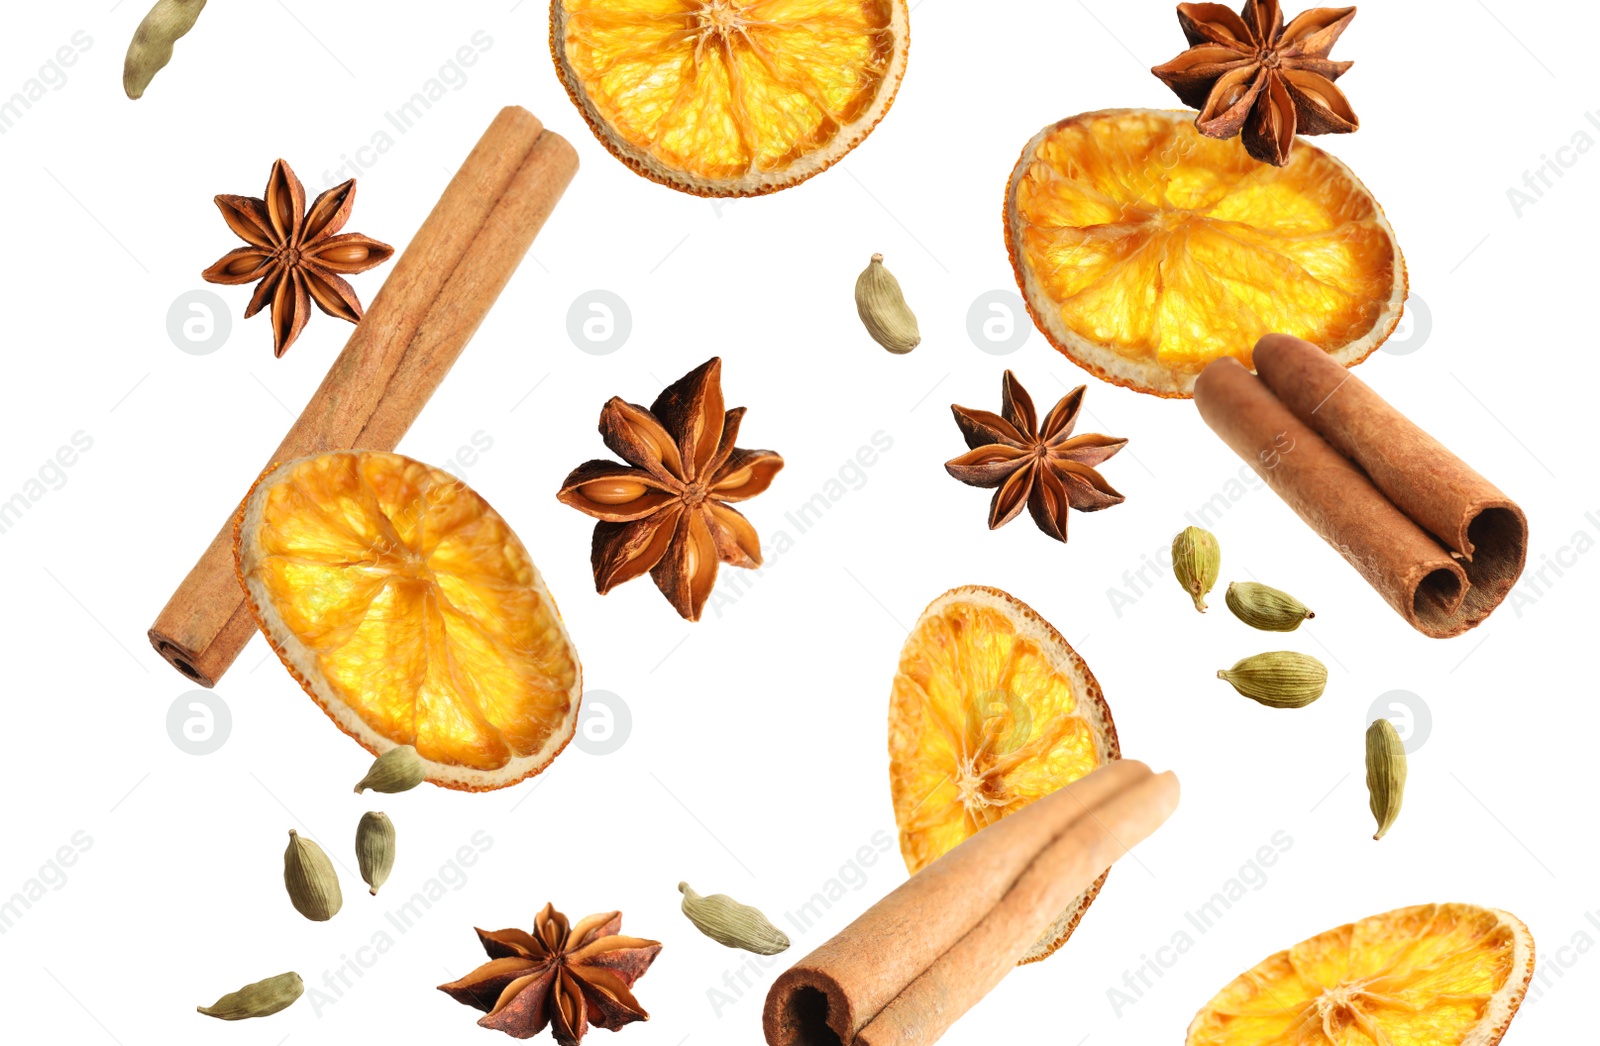 Image of Slices of dried orange, aromatic anise stars, cinnamon and cardamom falling on white background